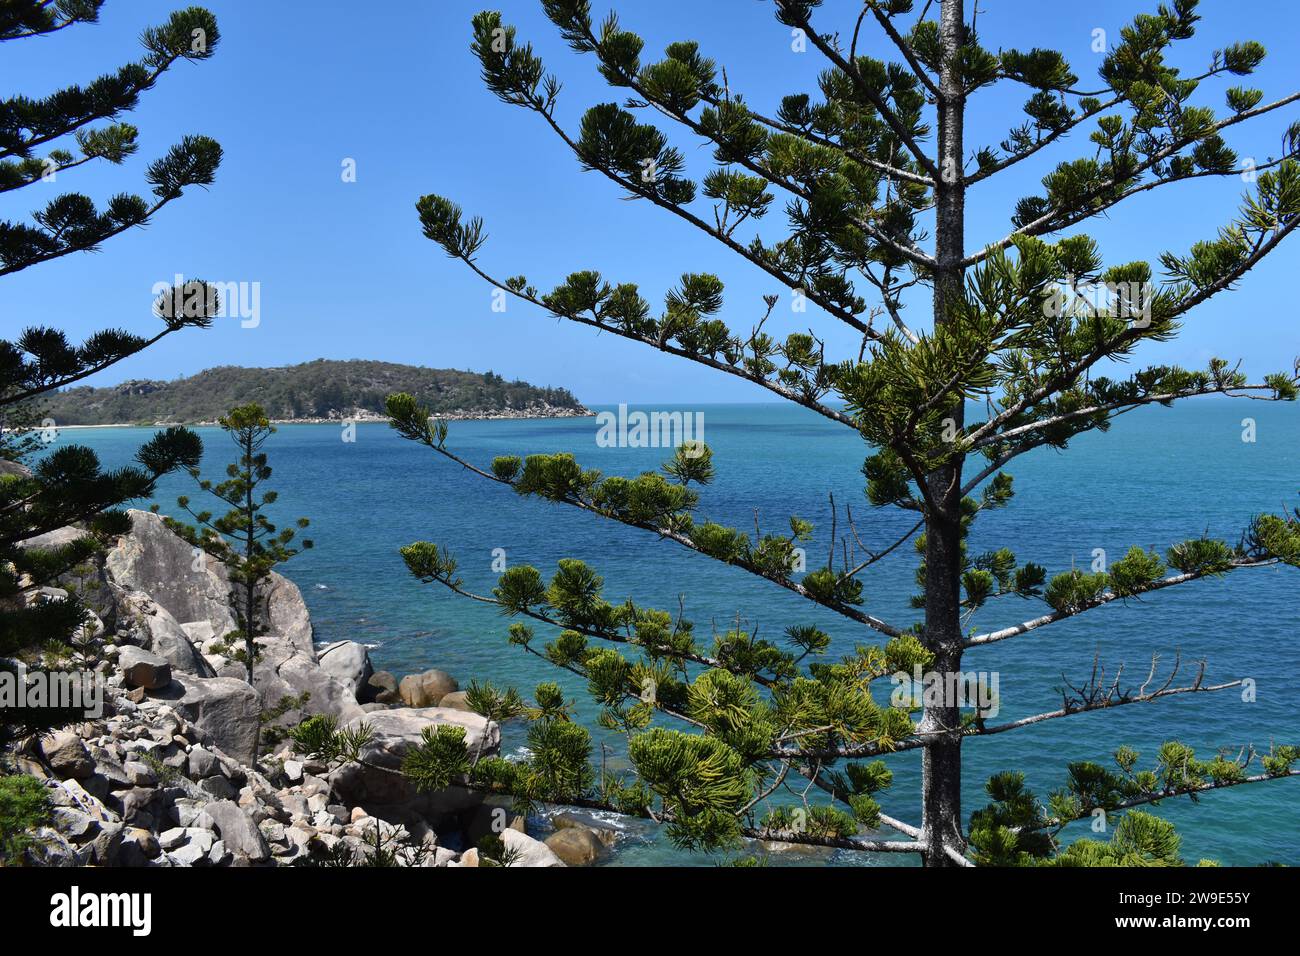 View over bay with granite boulders and Hoop pines in foreground, Geoffrey Bay, Magnetic Island, Queensland, Australia Stock Photo